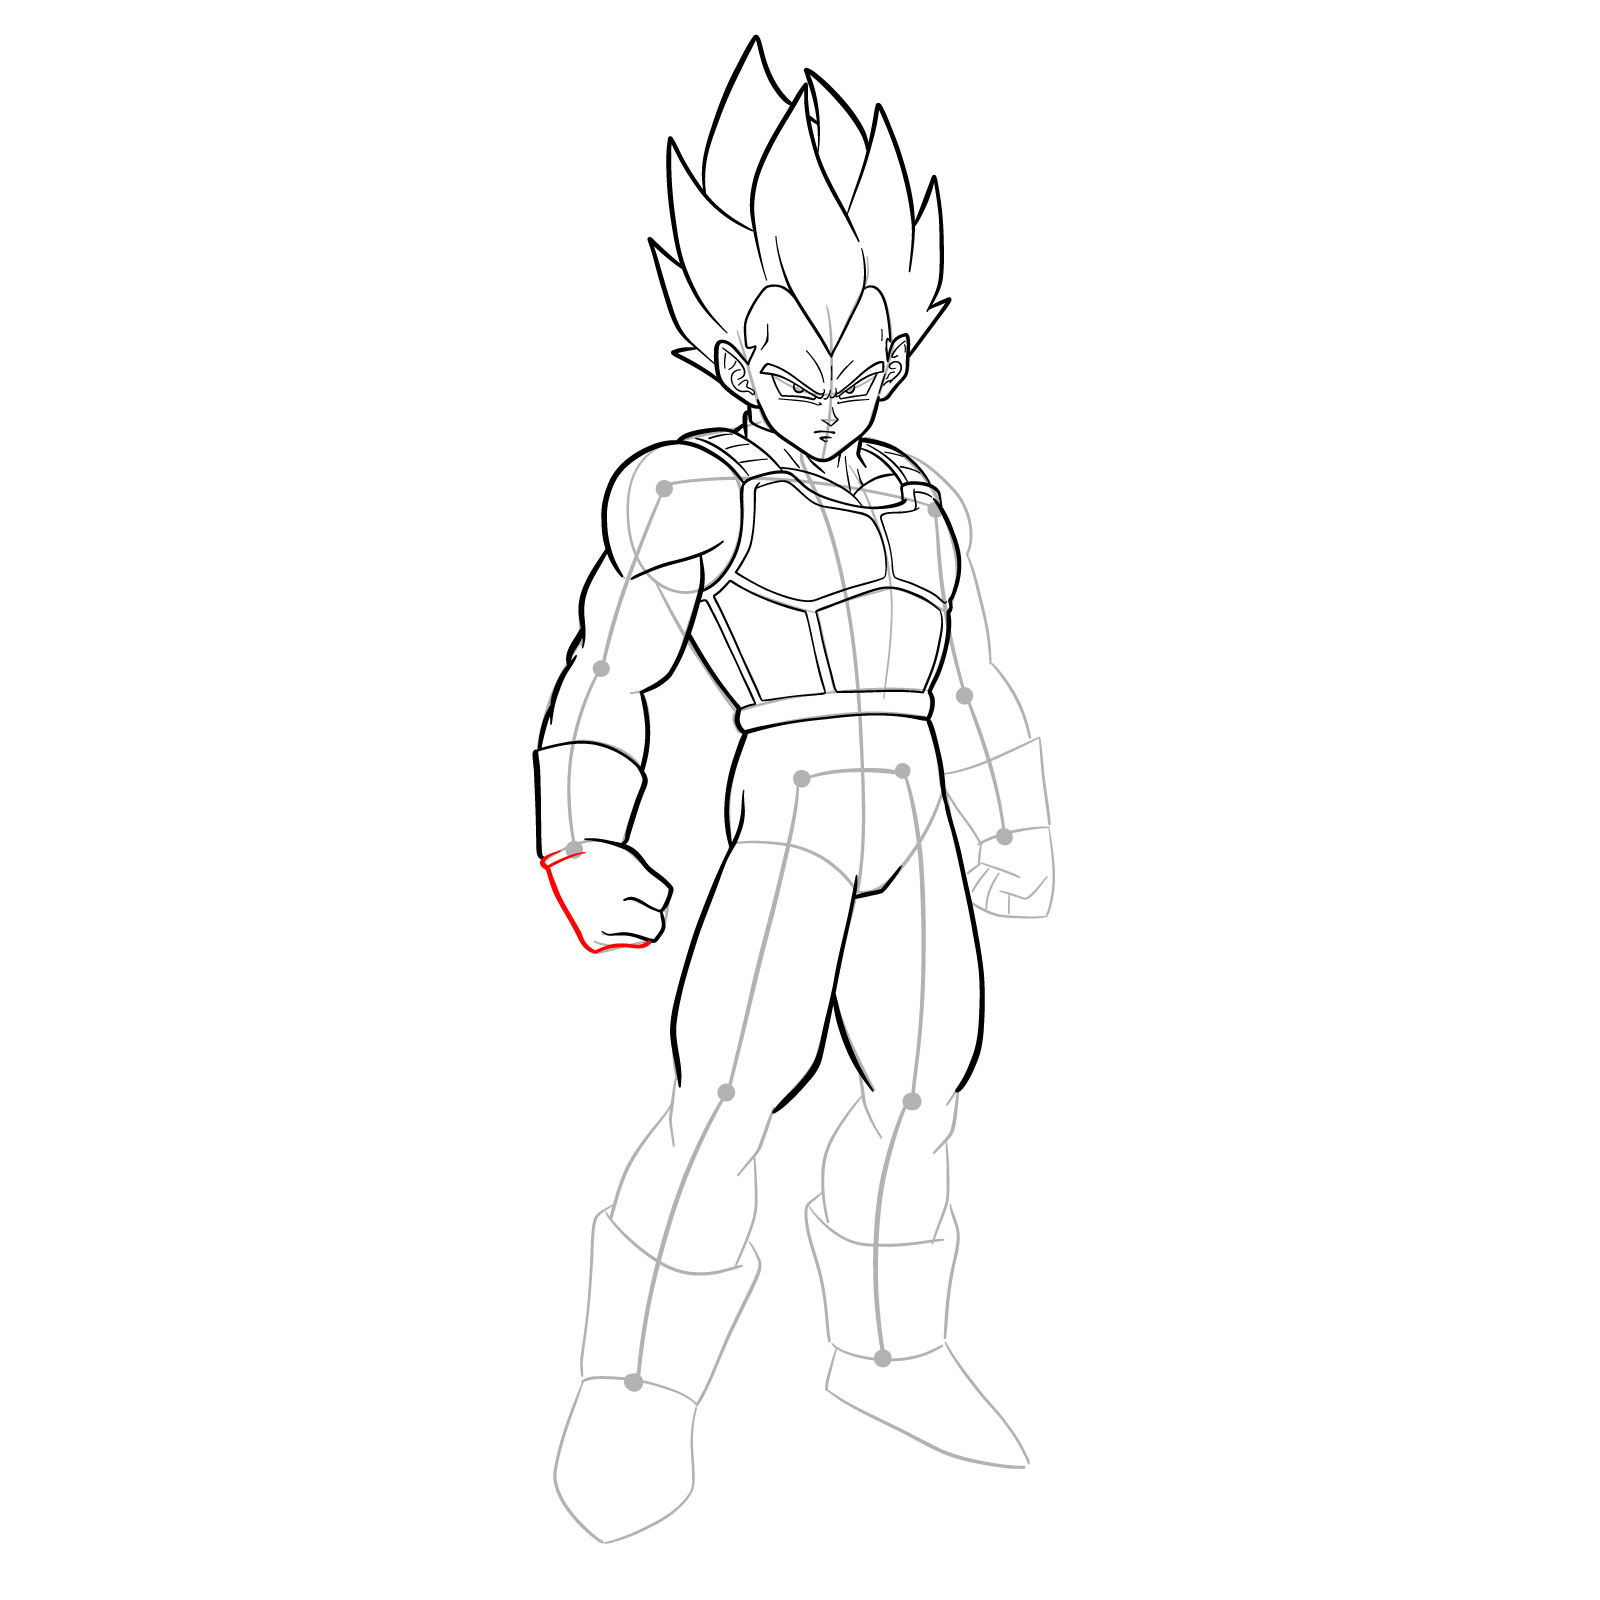 How to draw Vegeta in SSGSS - step 29